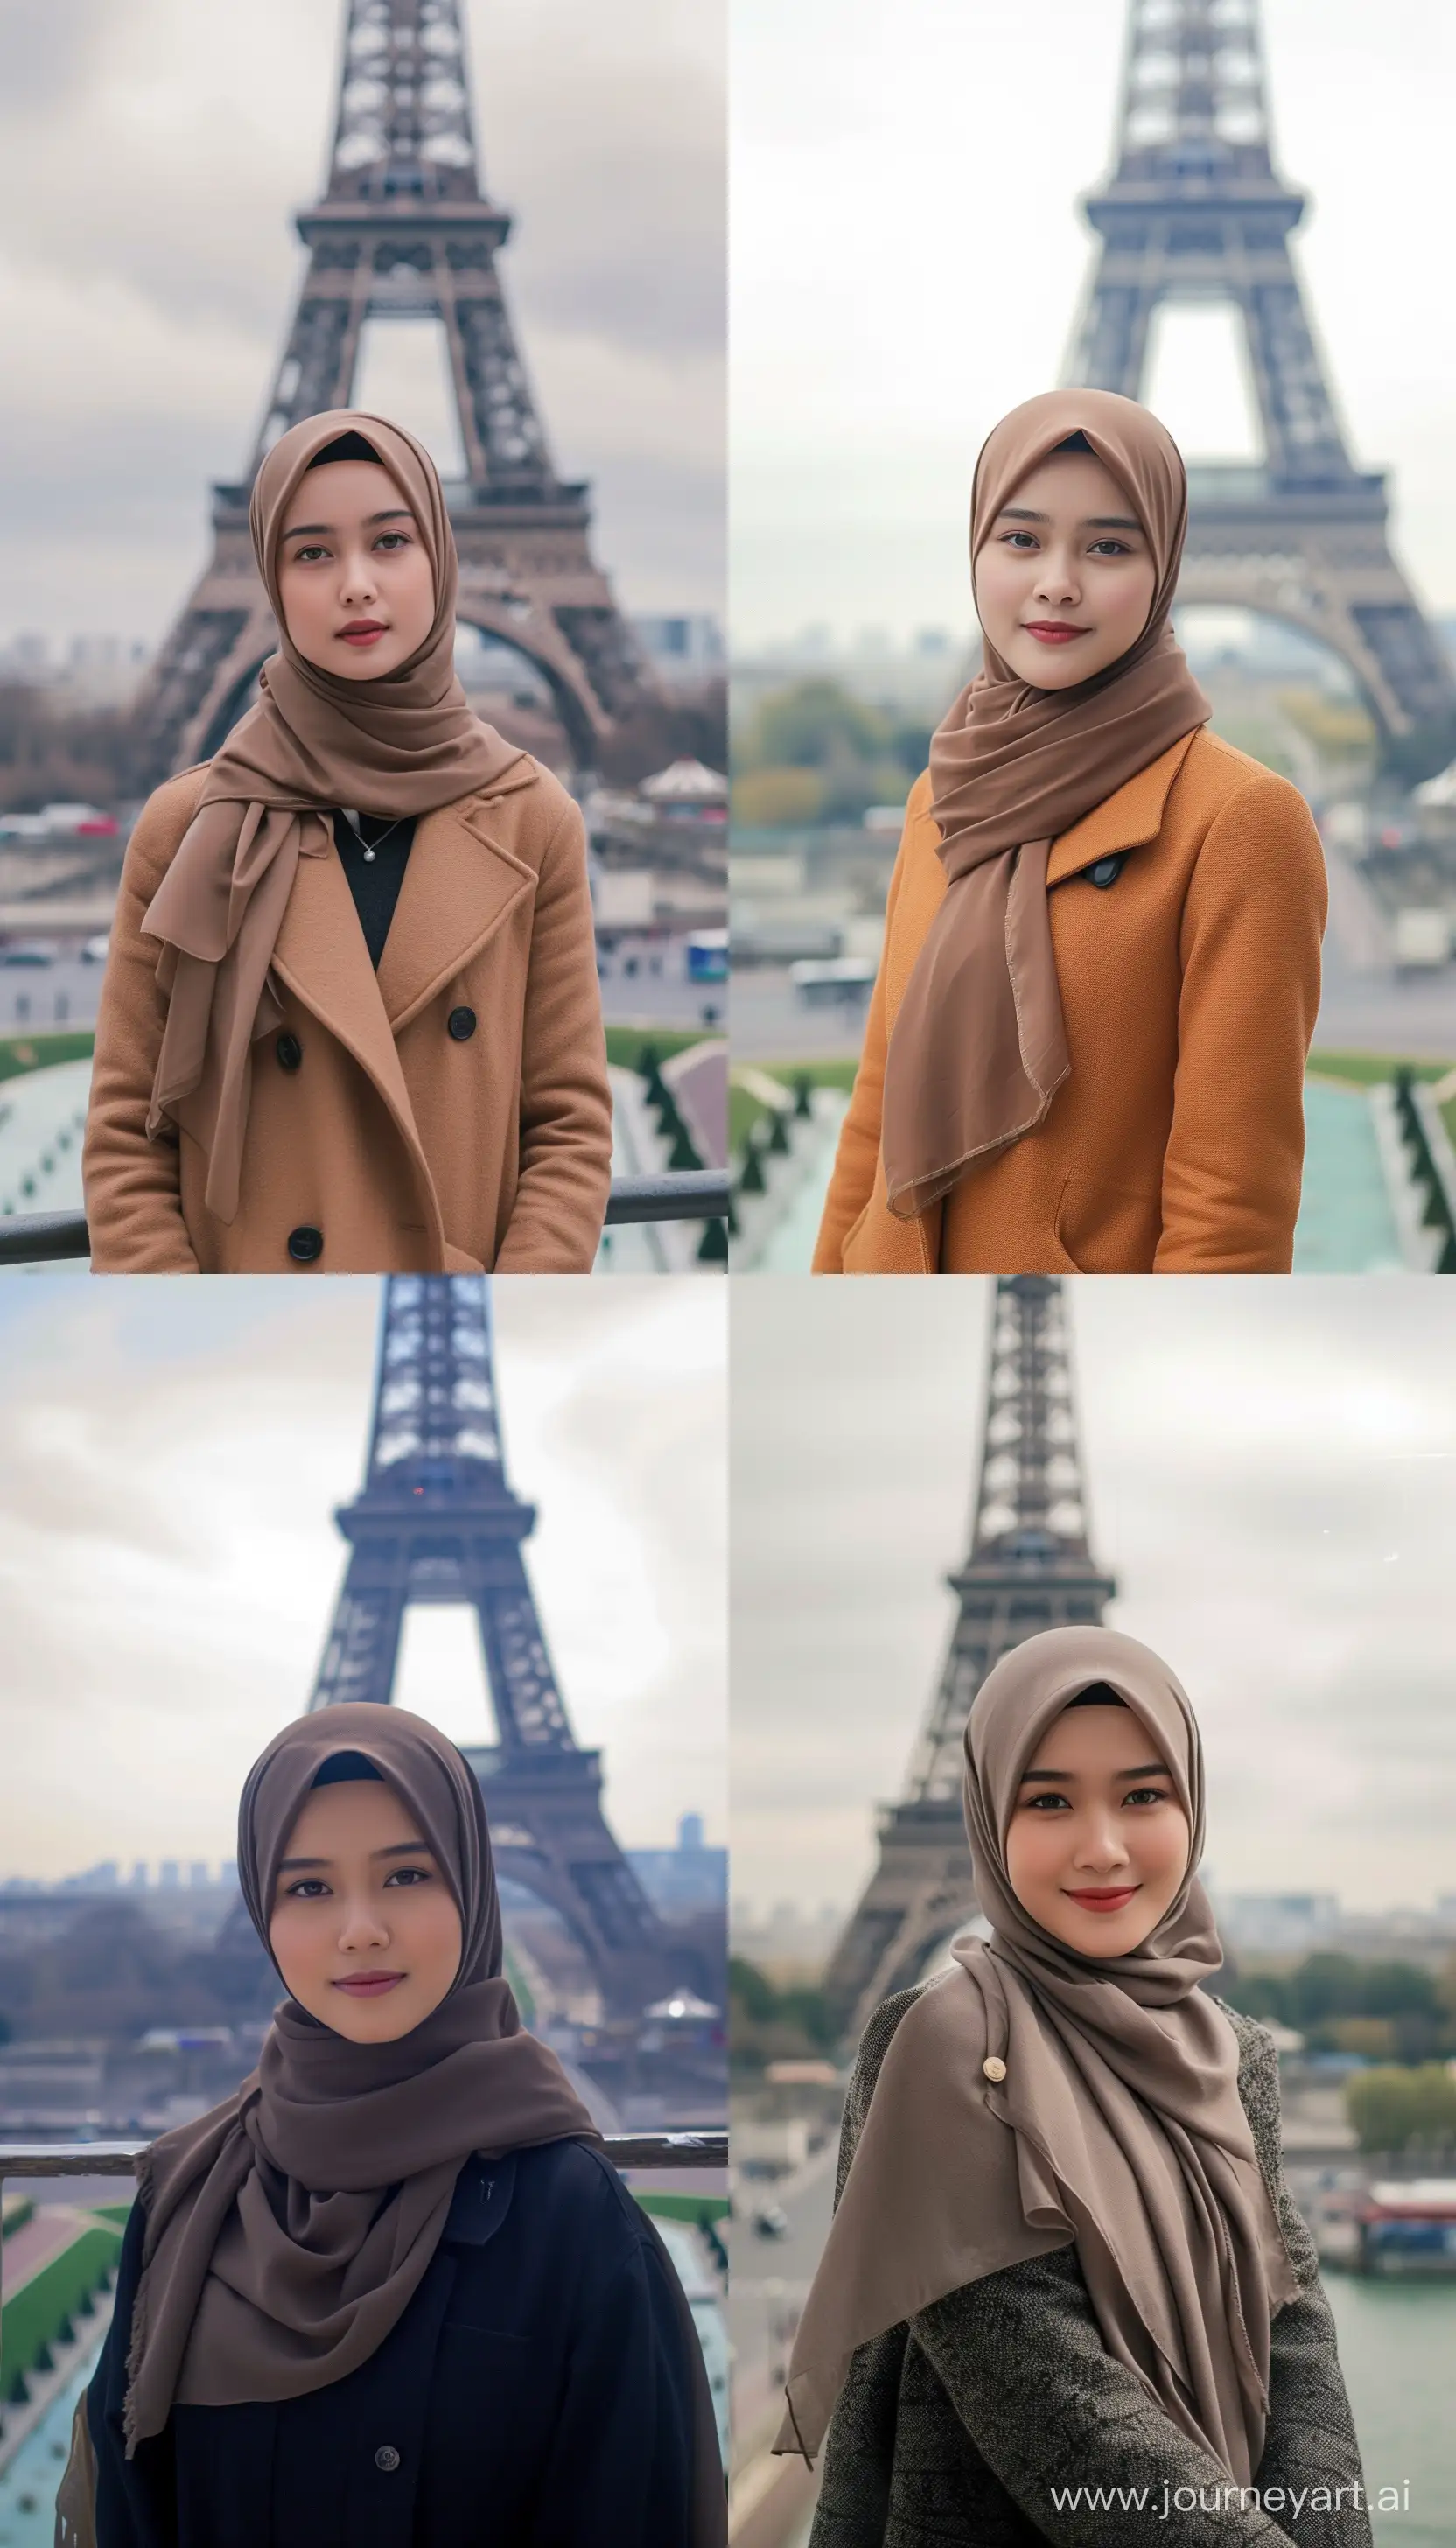 Elegant-Young-Indonesian-Woman-in-Hijab-Poses-Gracefully-Against-Parisian-Backdrop